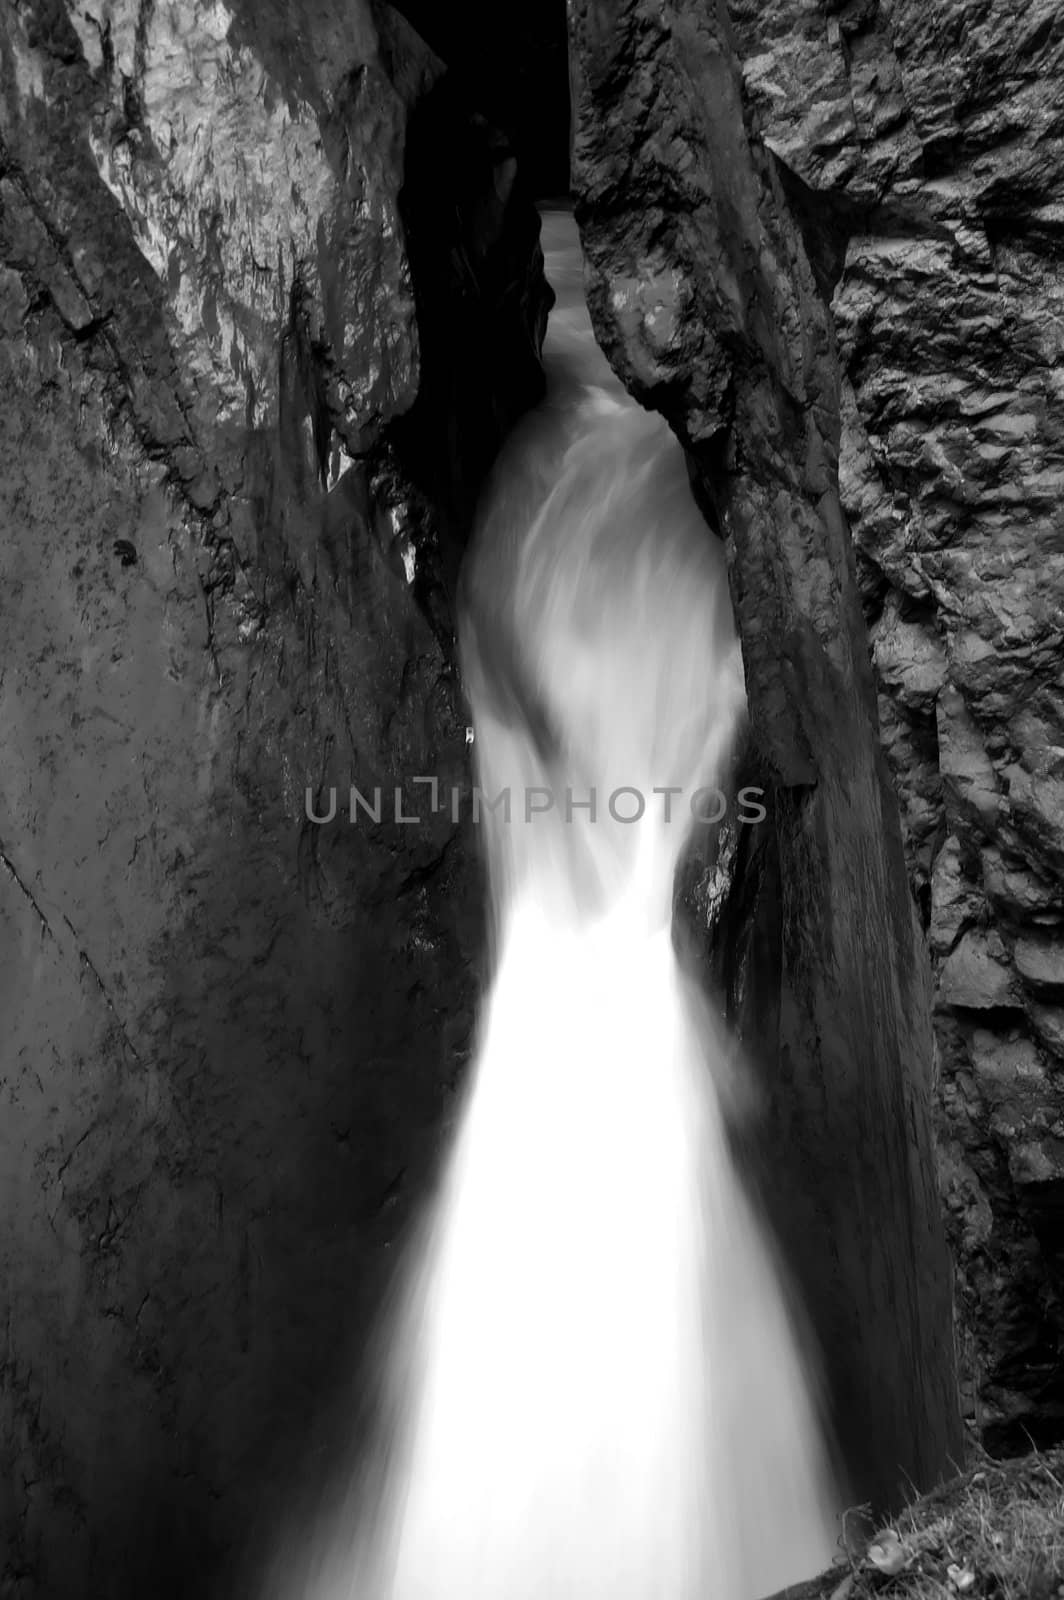 Waterfall in a cave	